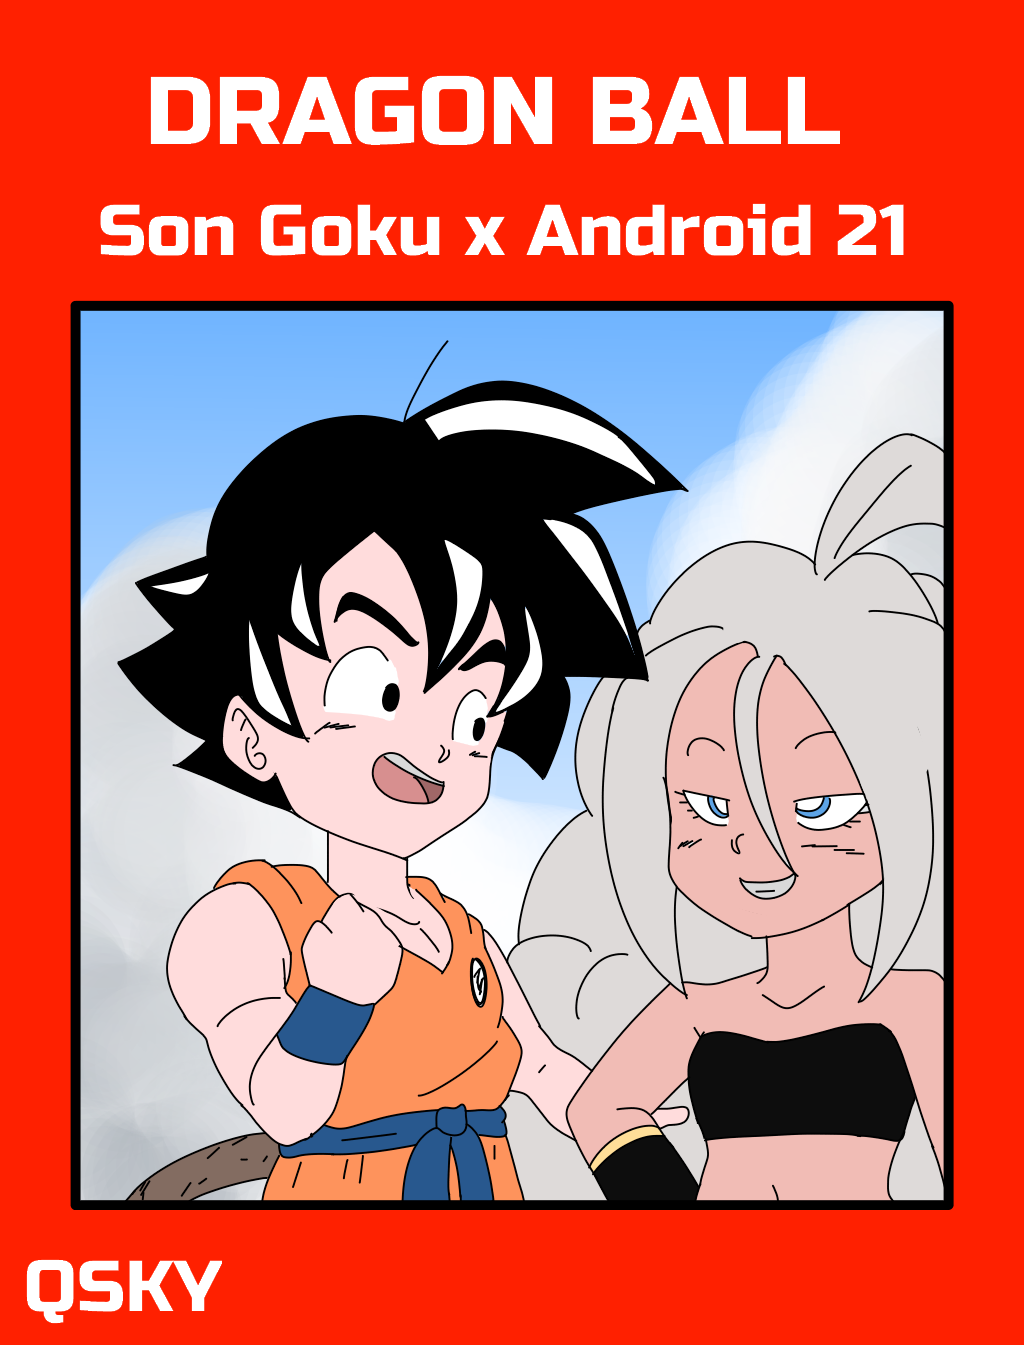 Dragon Ball Goku x Android 21 by Qsky on DeviantArt